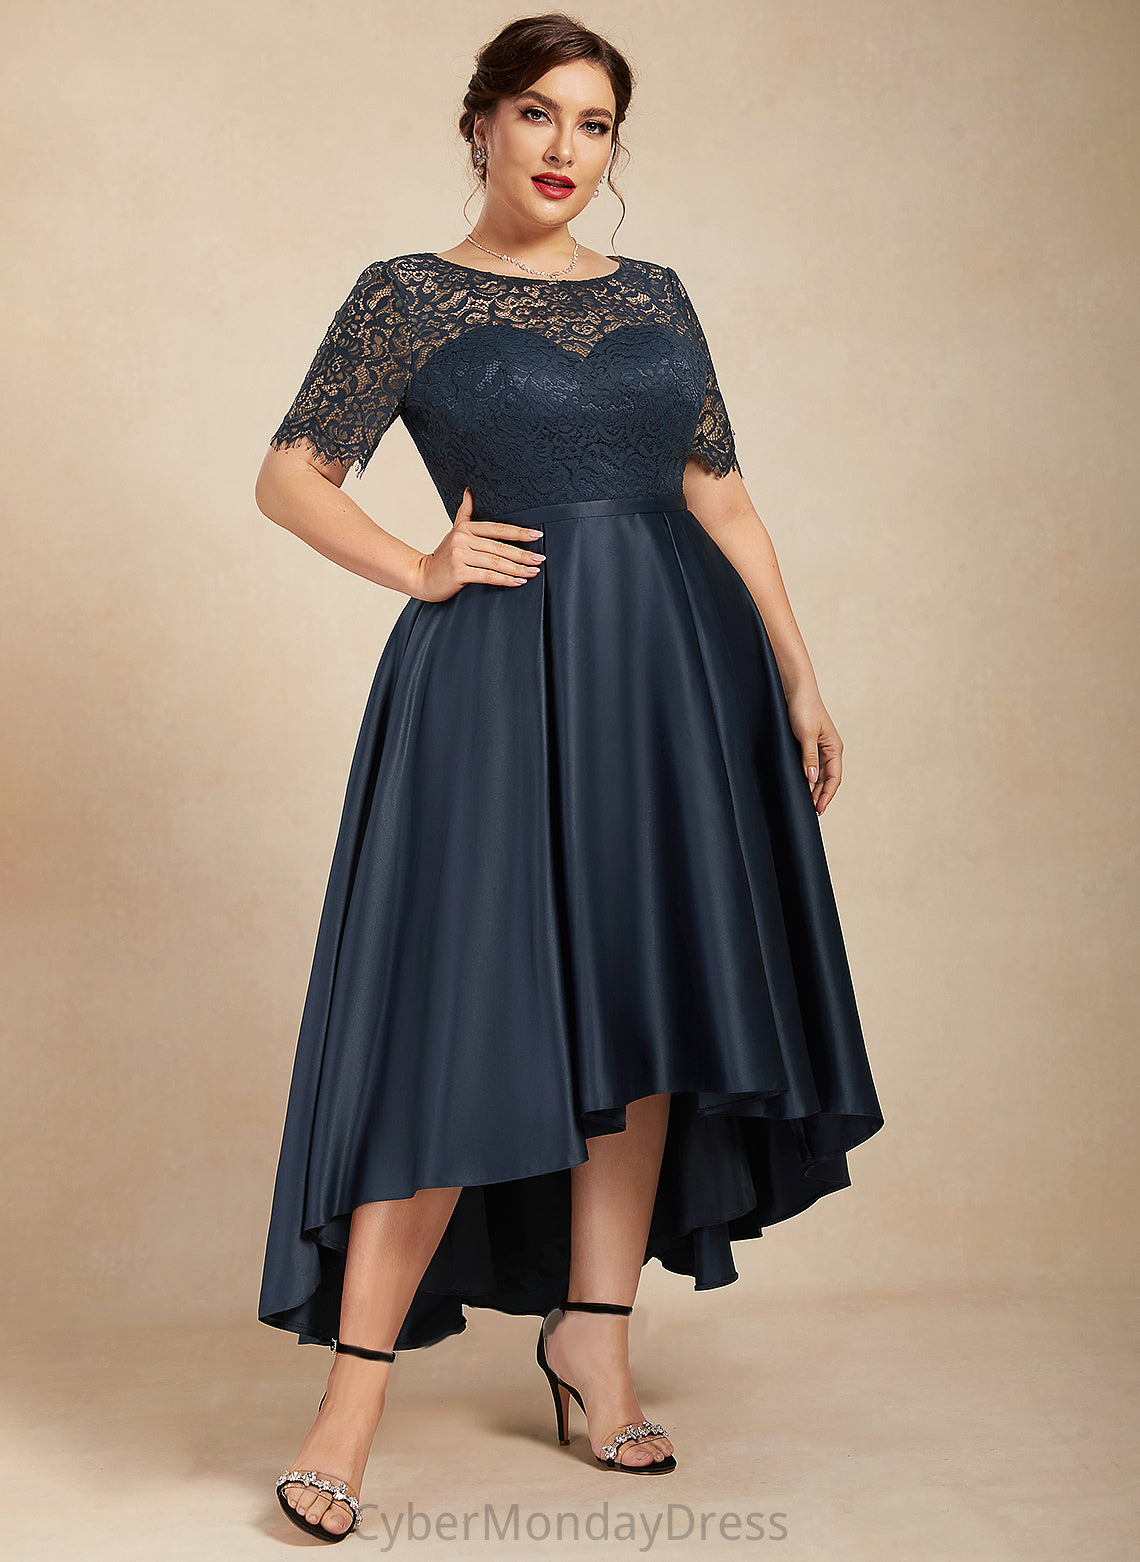 Cocktail Dresses With Dress Neck A-Line Layla Lace Scoop Pockets Asymmetrical Satin Cocktail